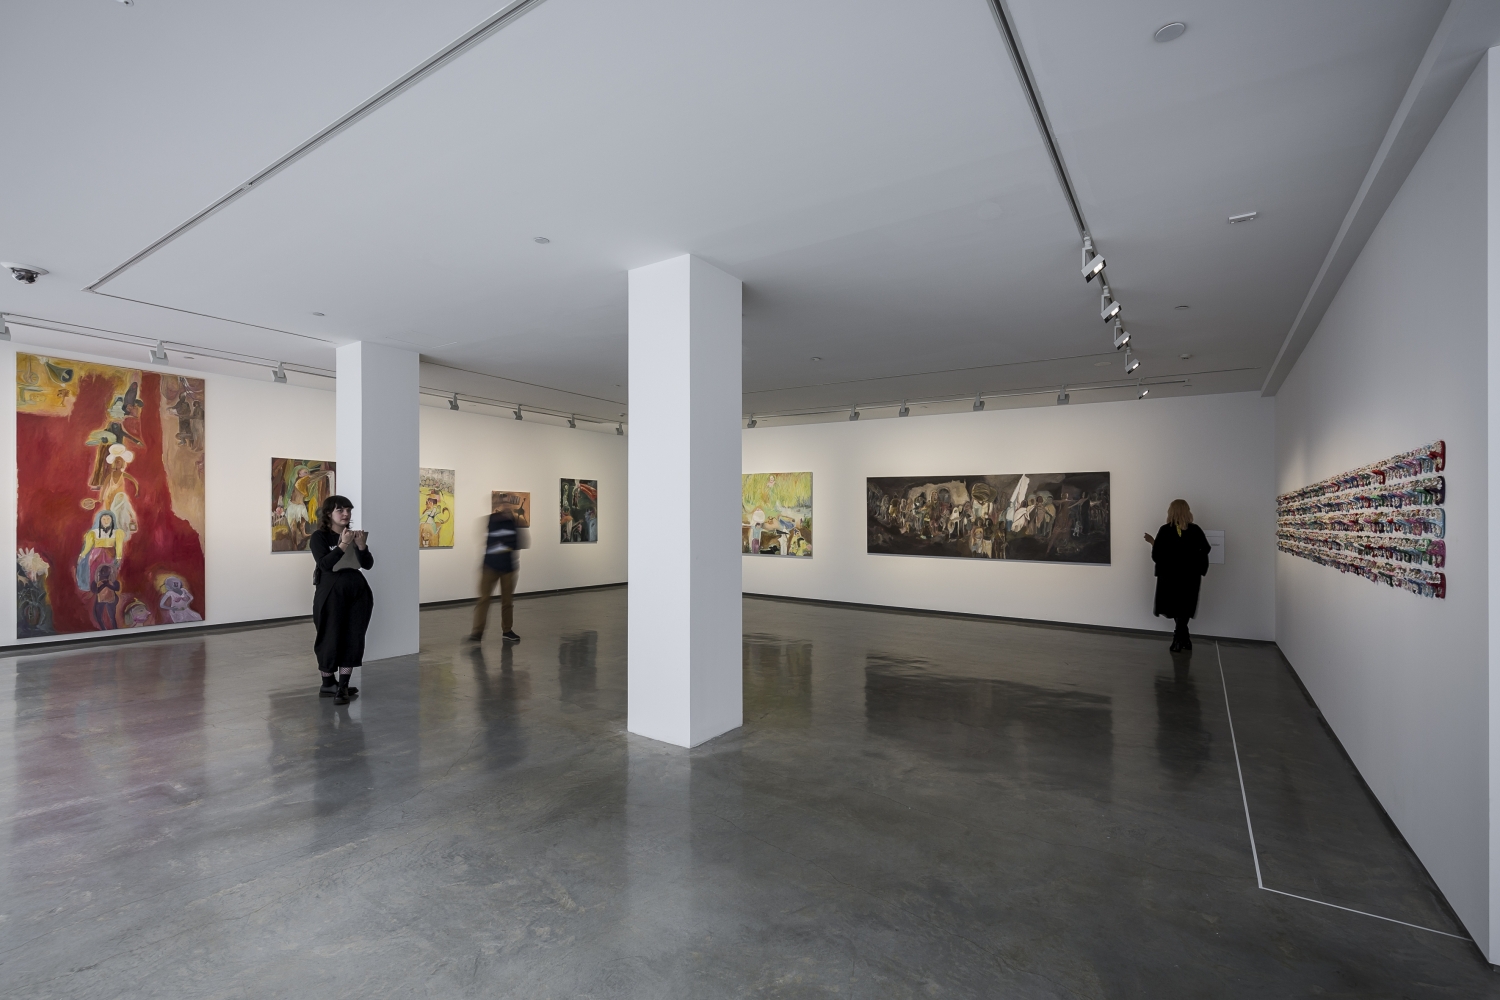 Sosa Joseph. Installation view (2018) at the Museum of Contemporary Art Australia for the 21st Biennale of Sydney.&amp;nbsp;